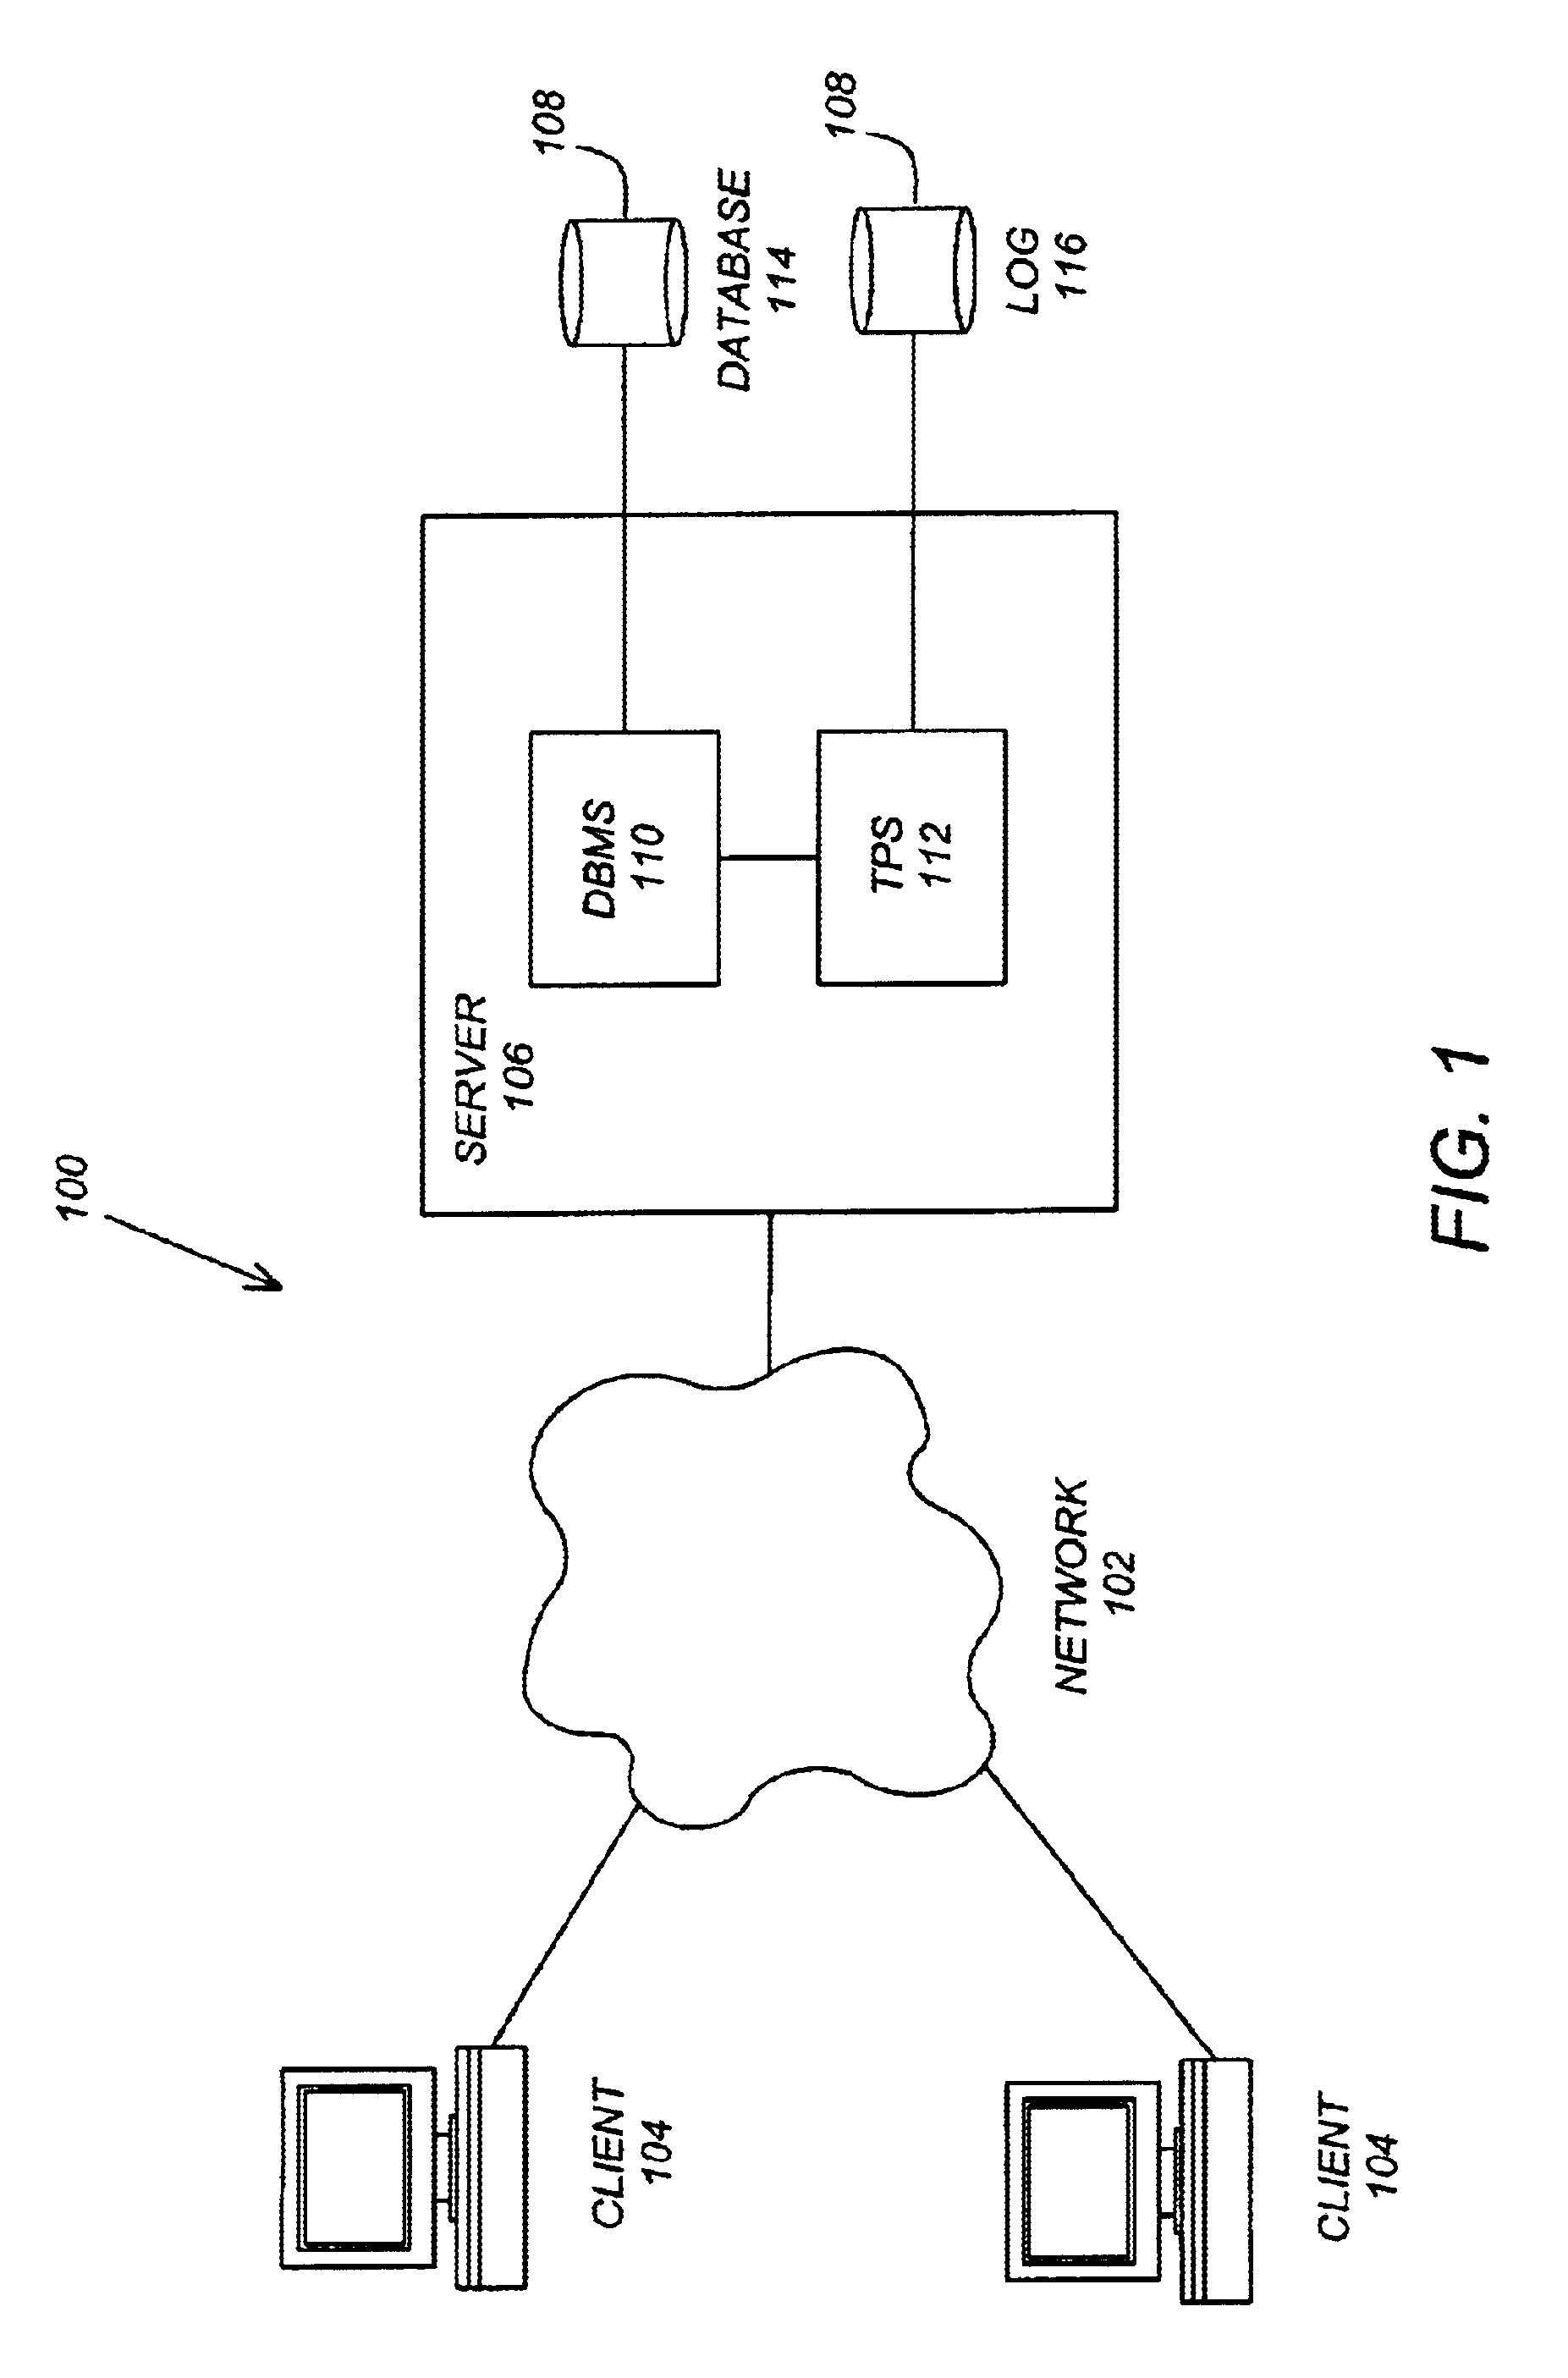 Assigning recoverable unique sequence numbers in a transaction processing system